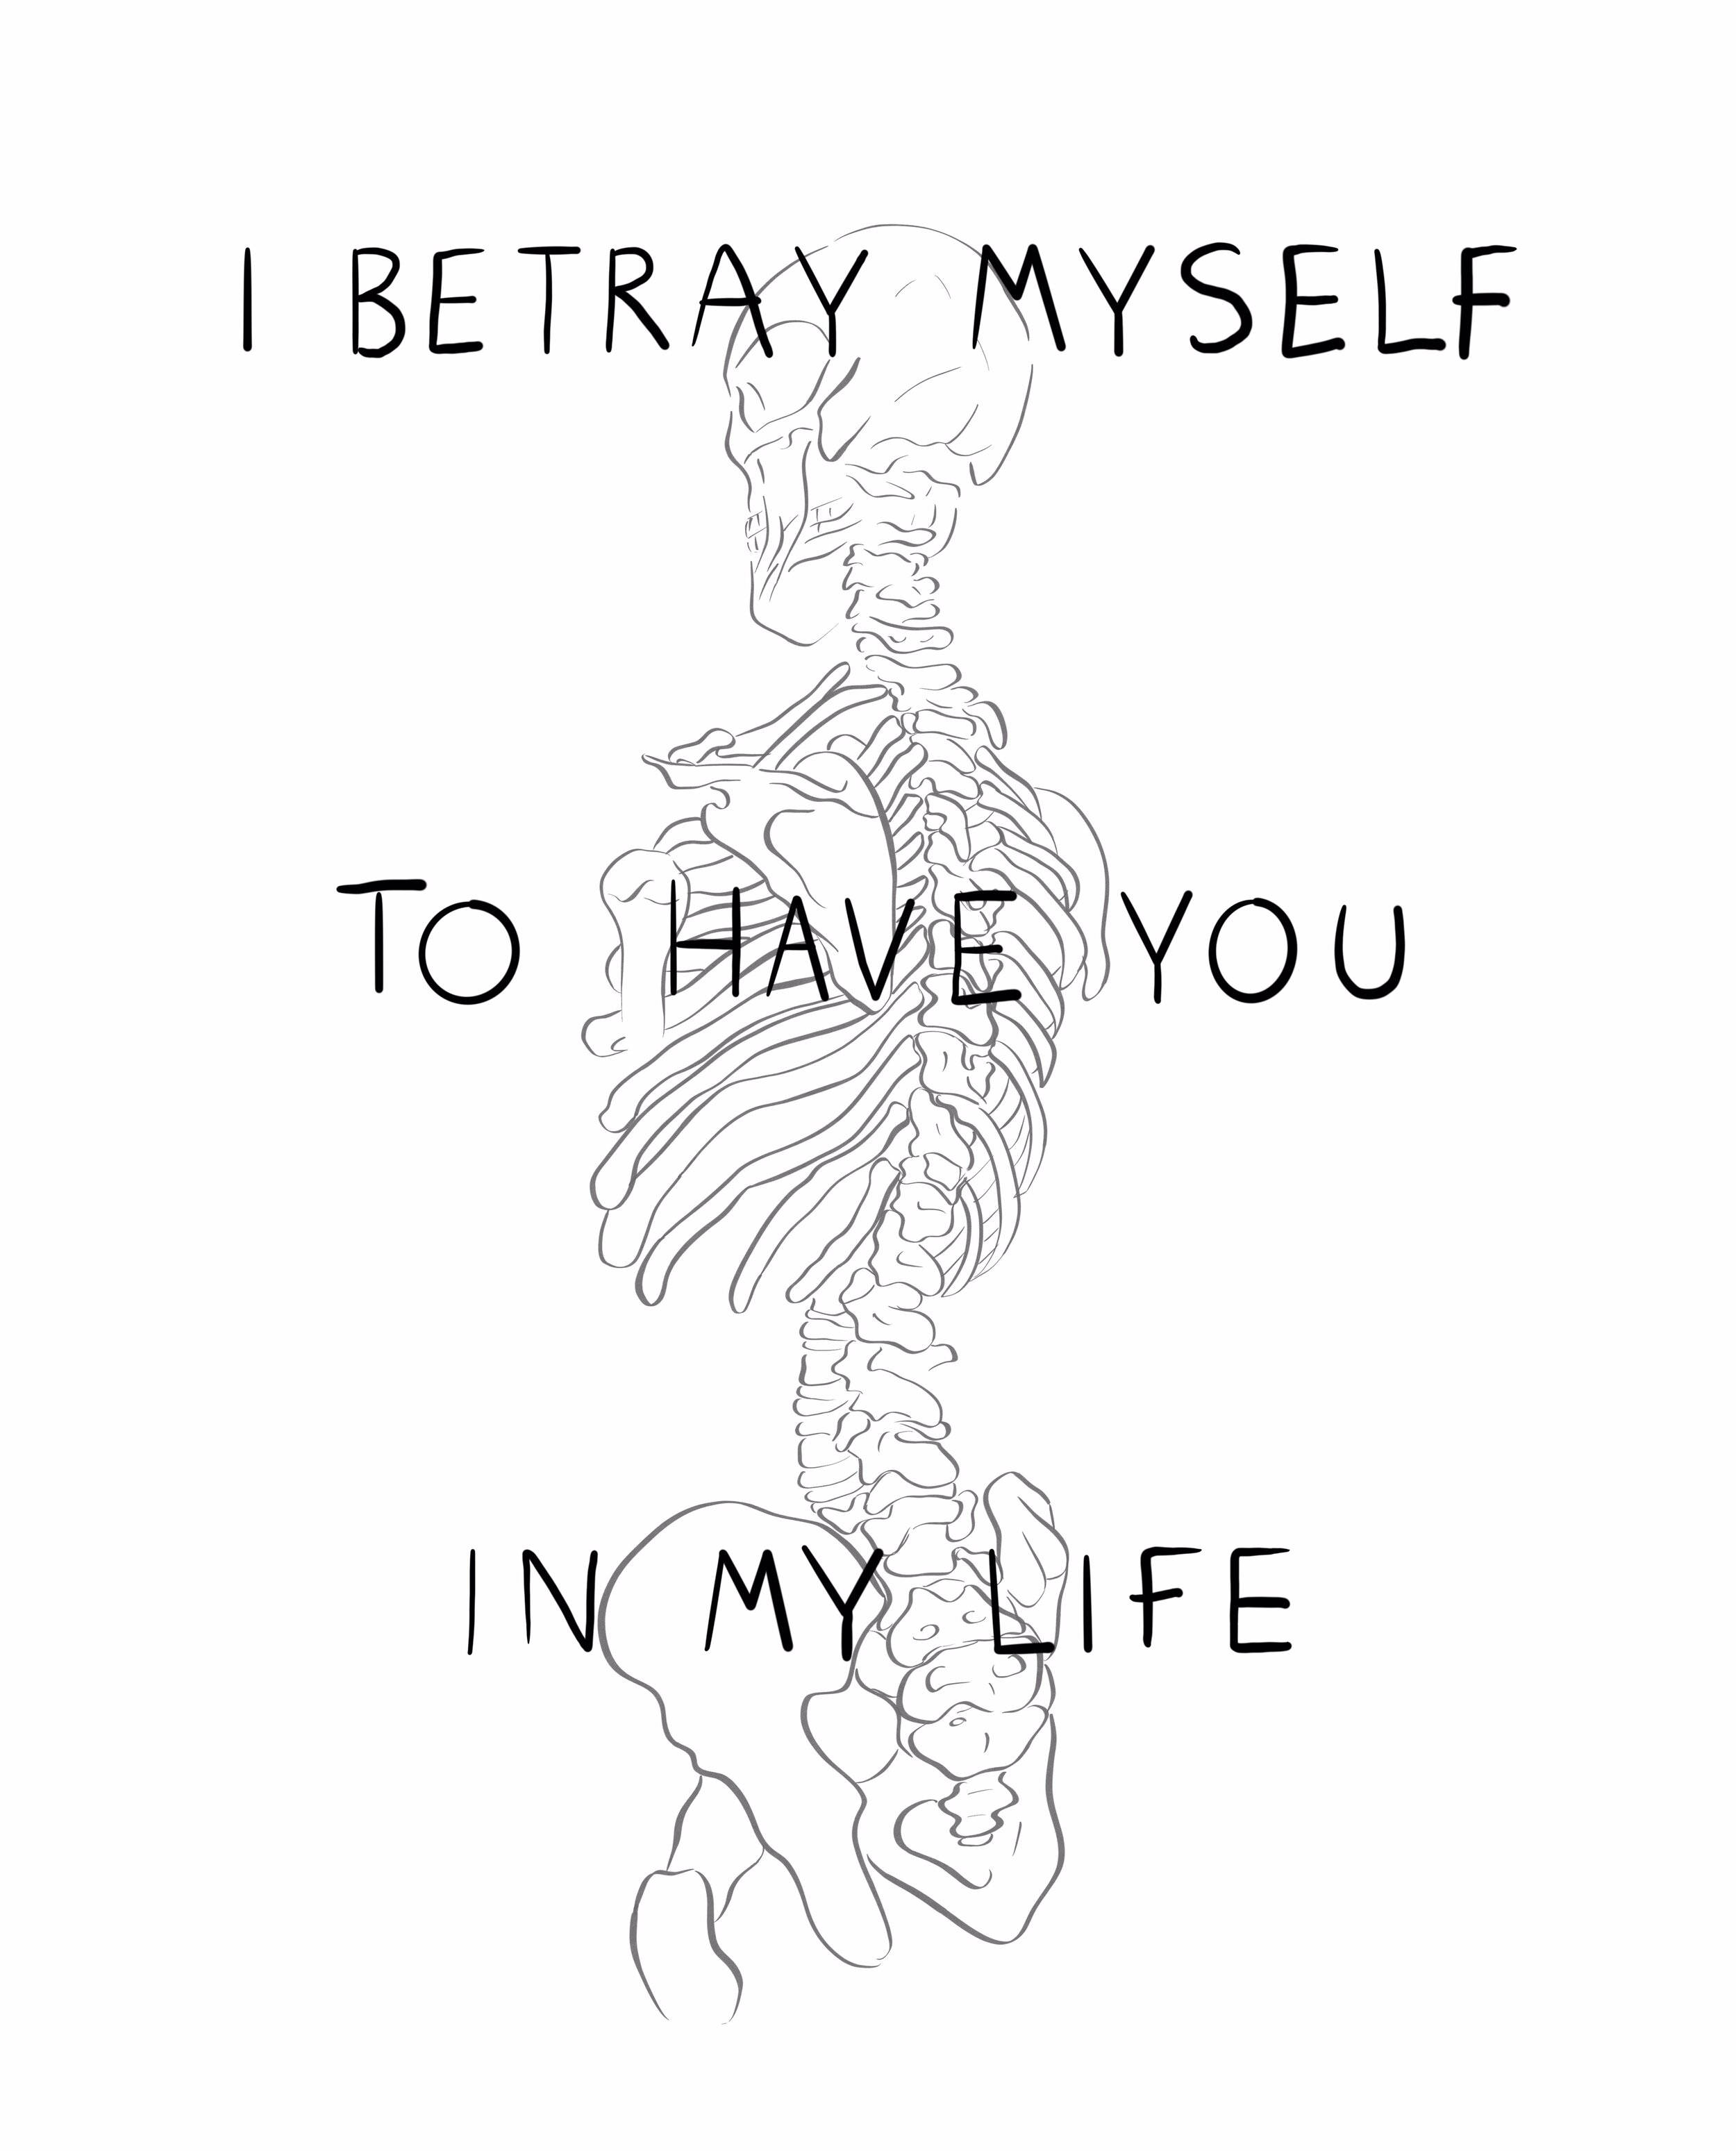 I betray myself to have you in my life 